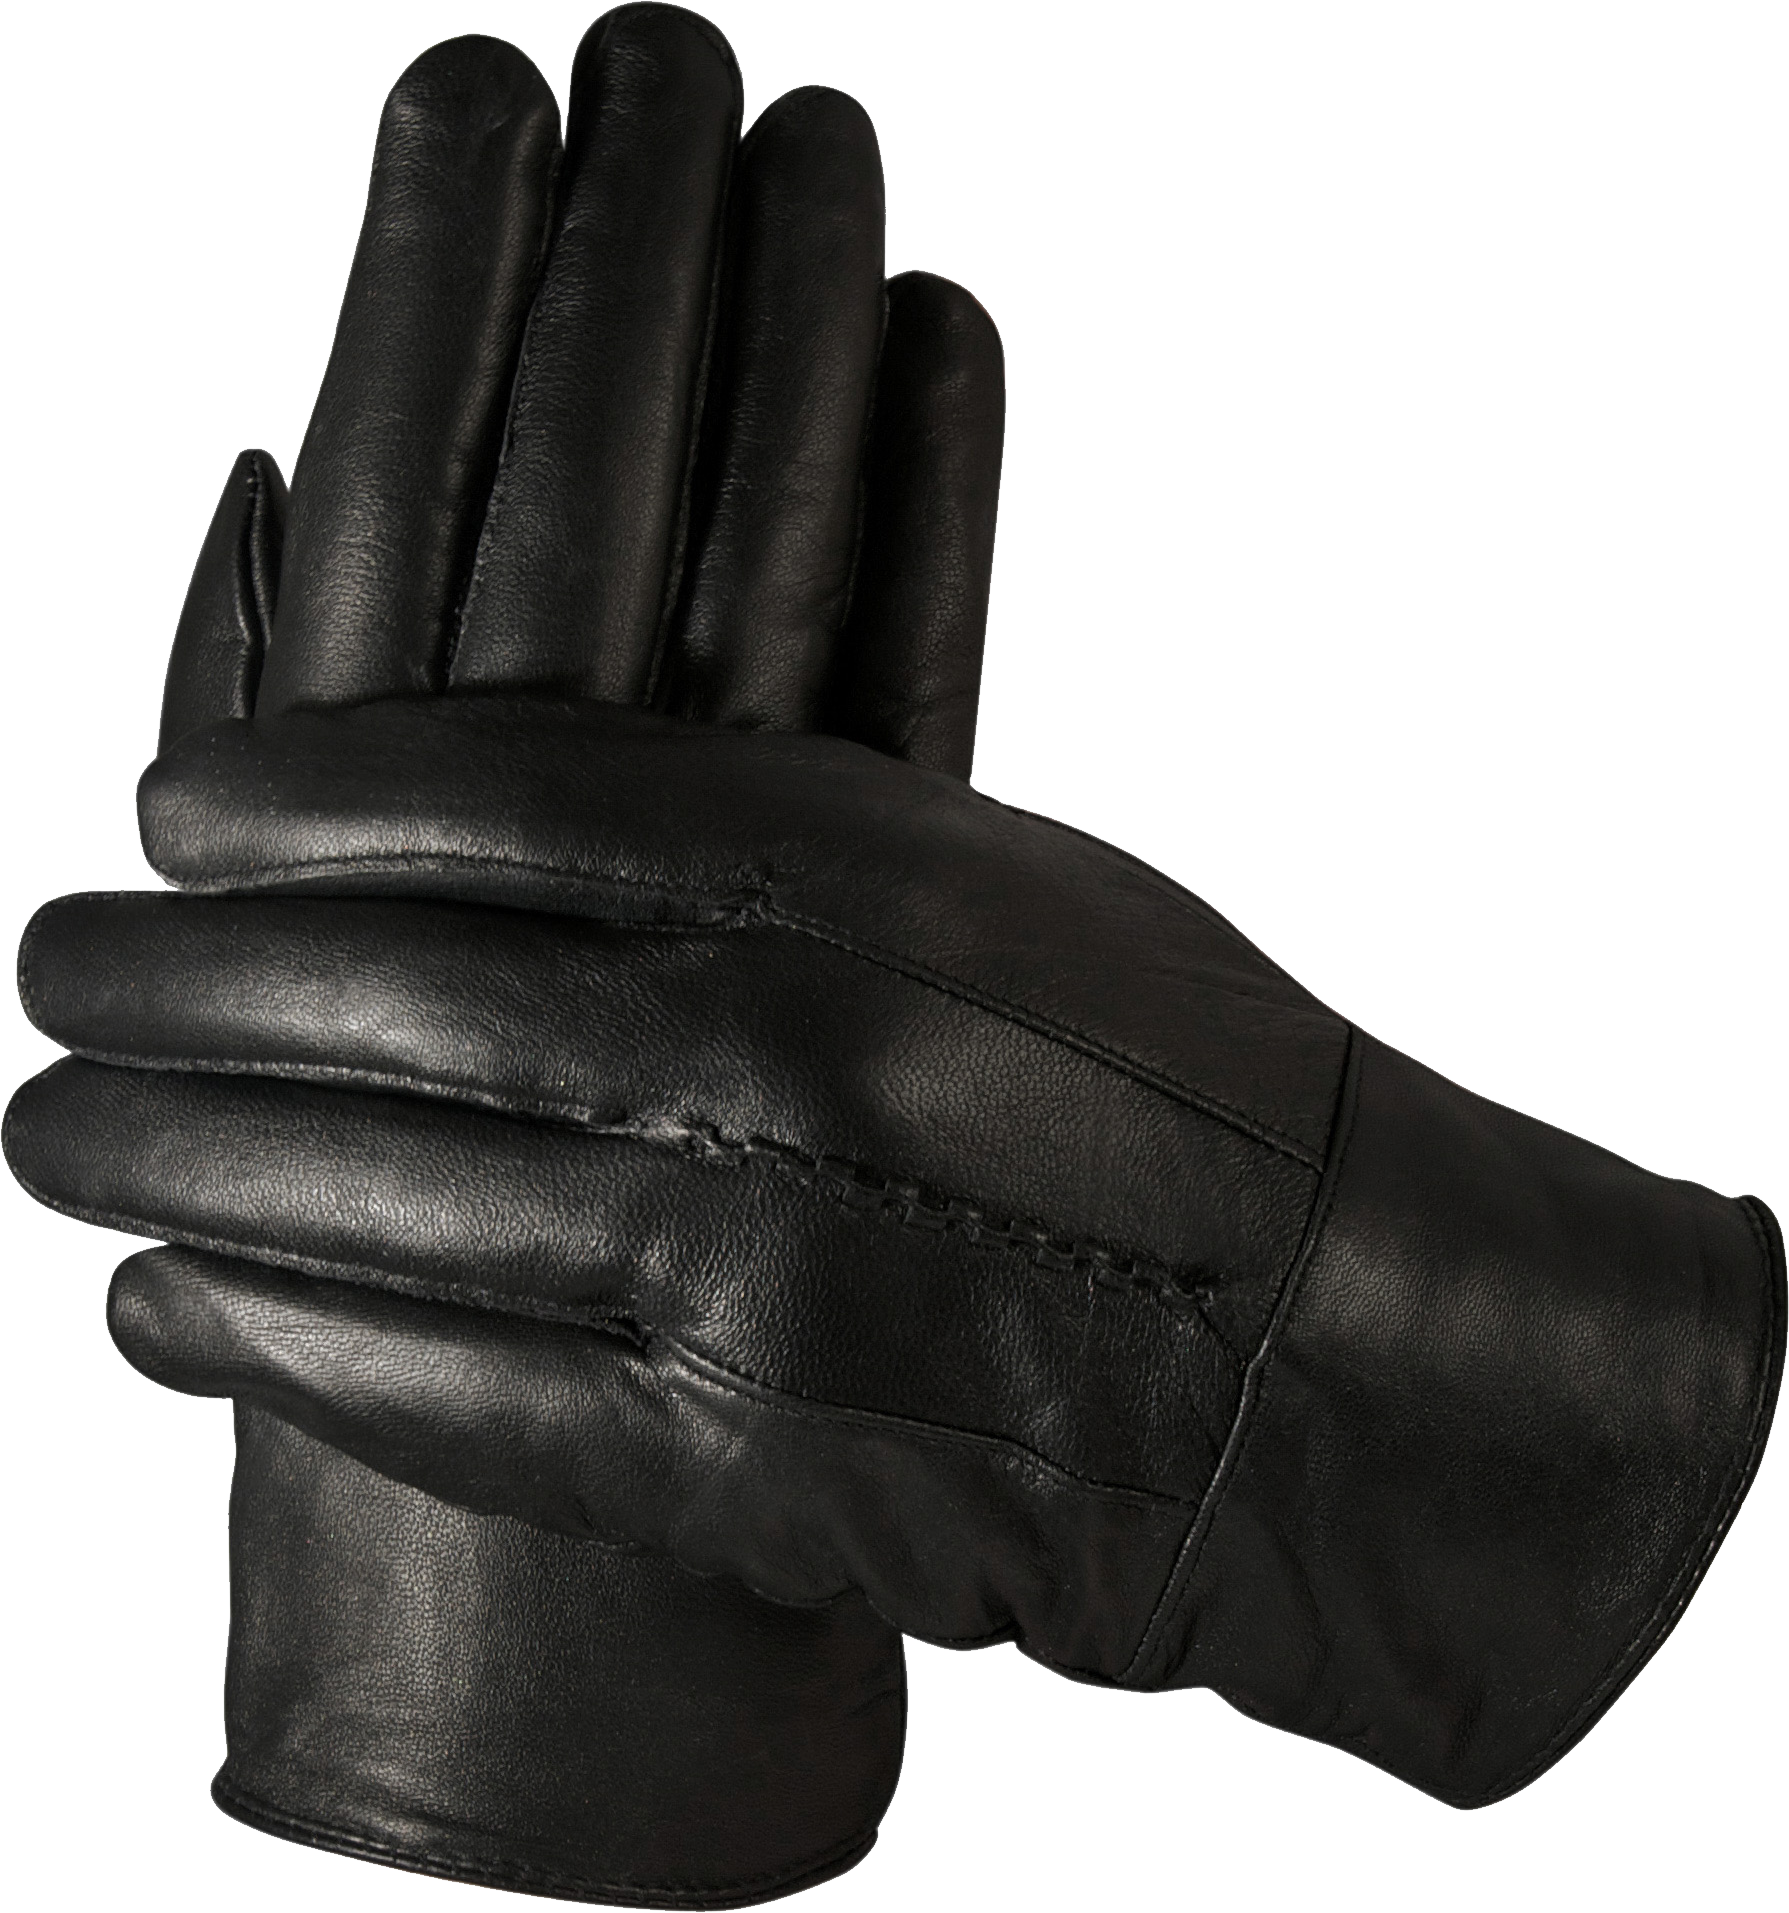 Gloves clipart leather glove, Gloves leather glove